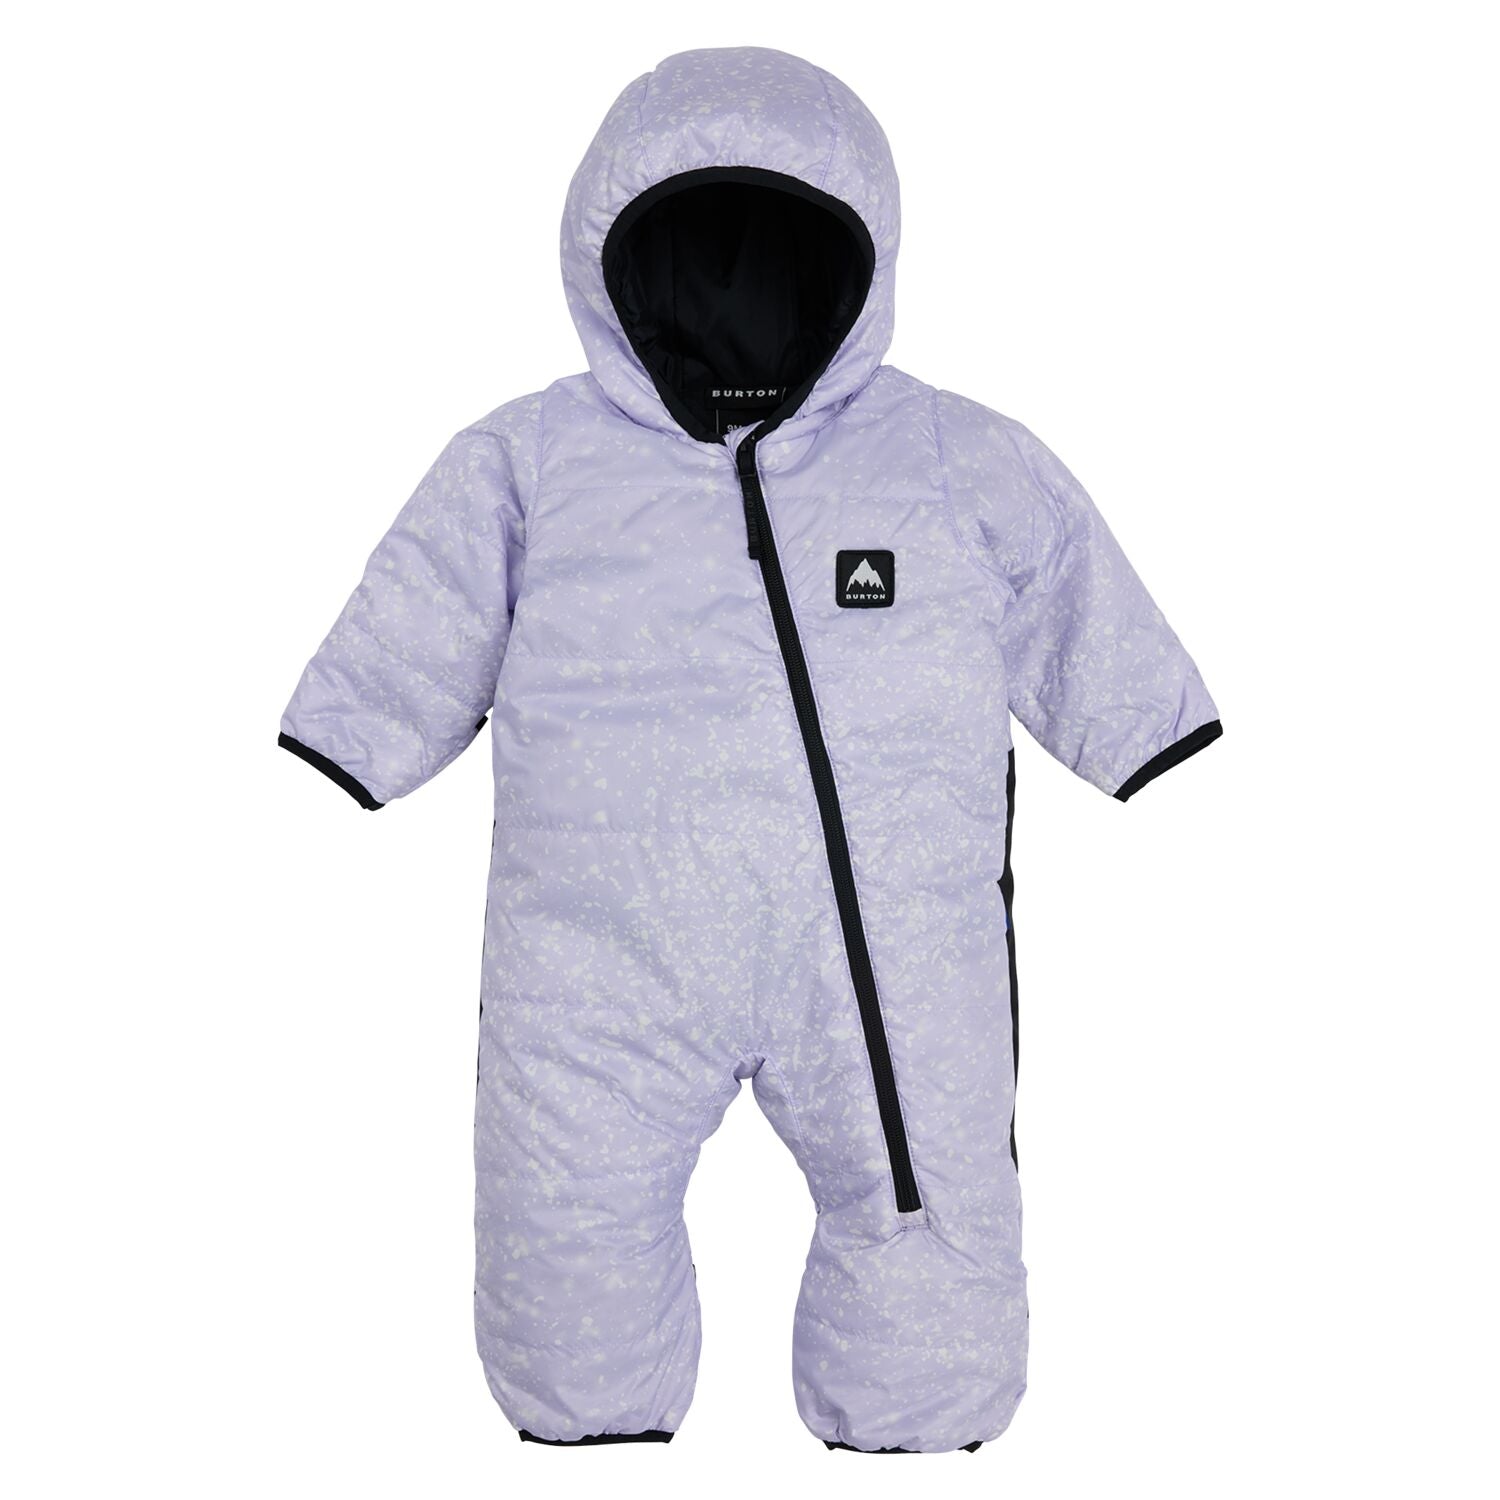 Toddlers' Buddy Bunting Suit, Stardust